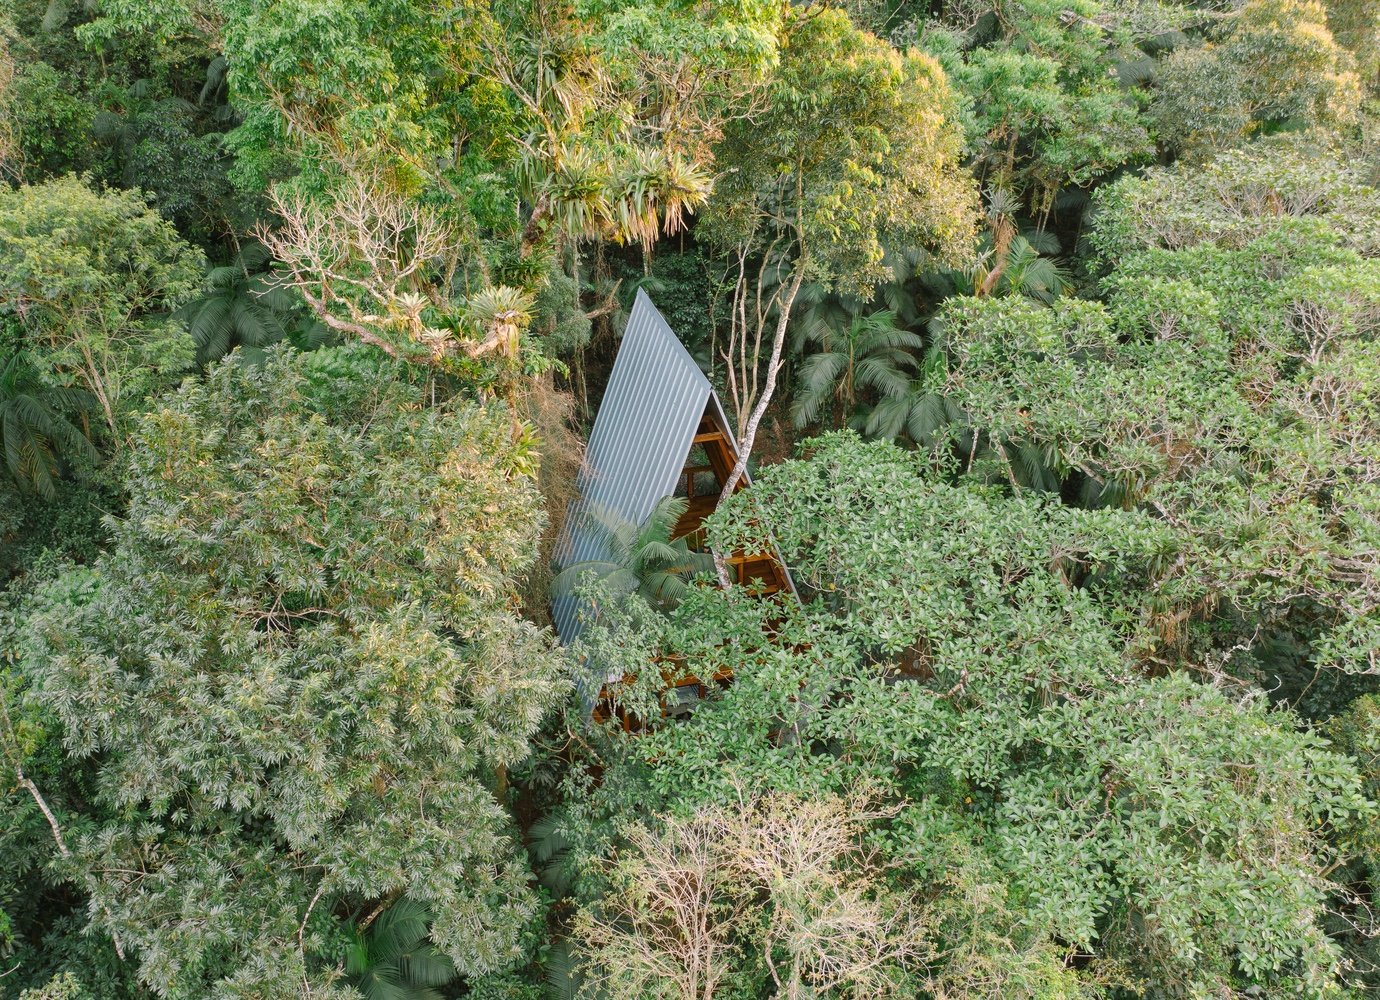 Monkey House: Croatian architect designs a vertical home in the Brazilian forest